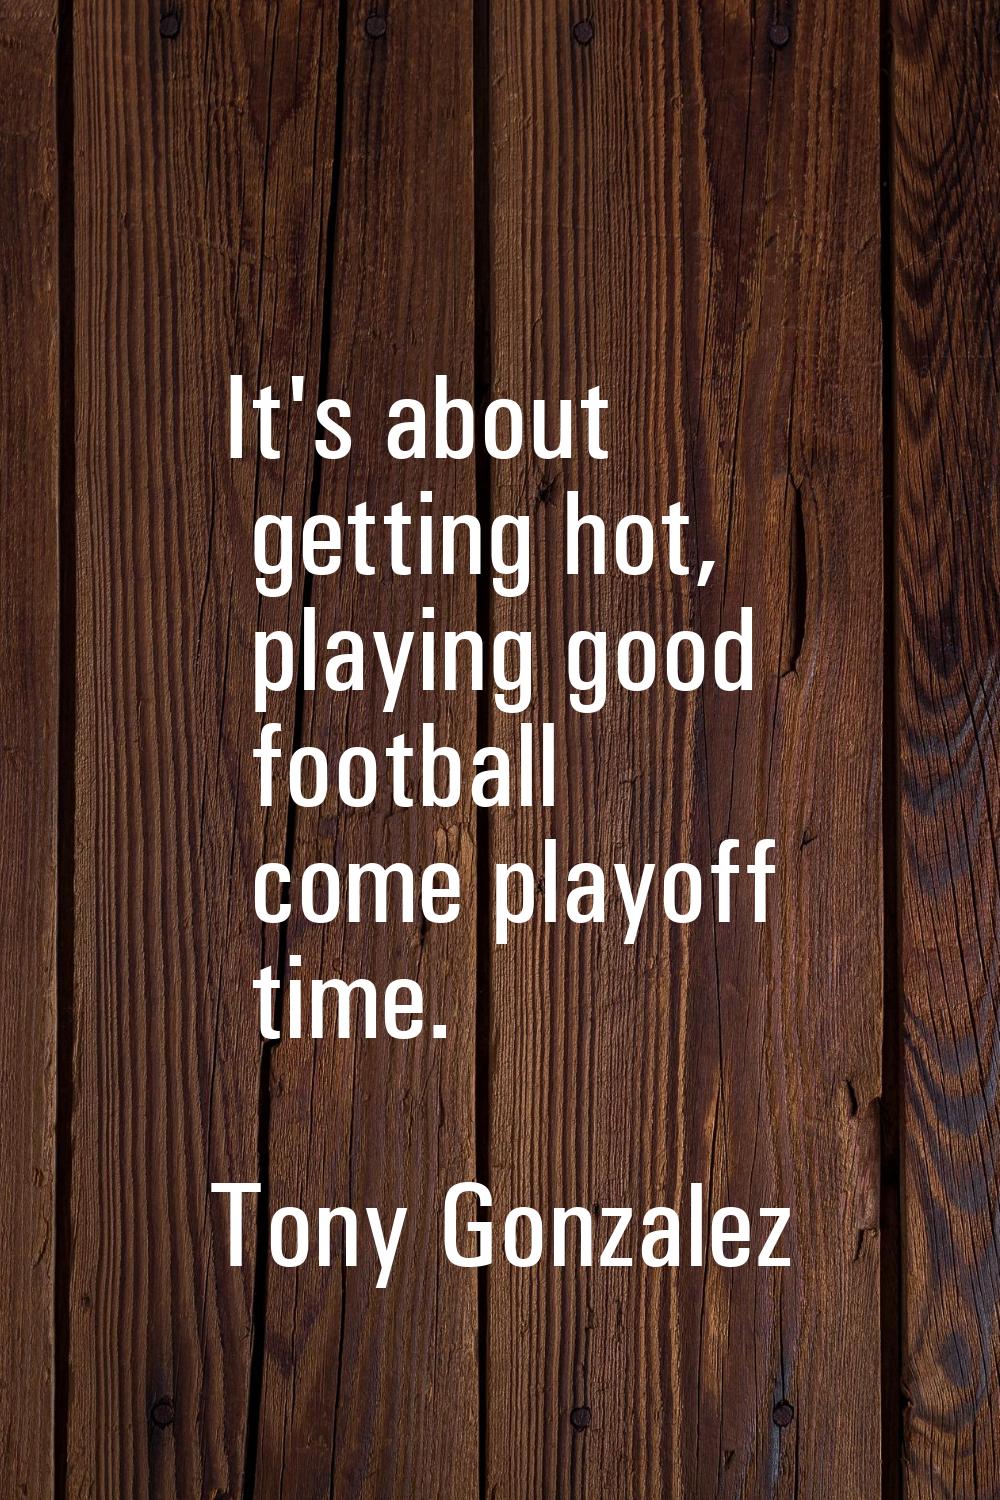 It's about getting hot, playing good football come playoff time.